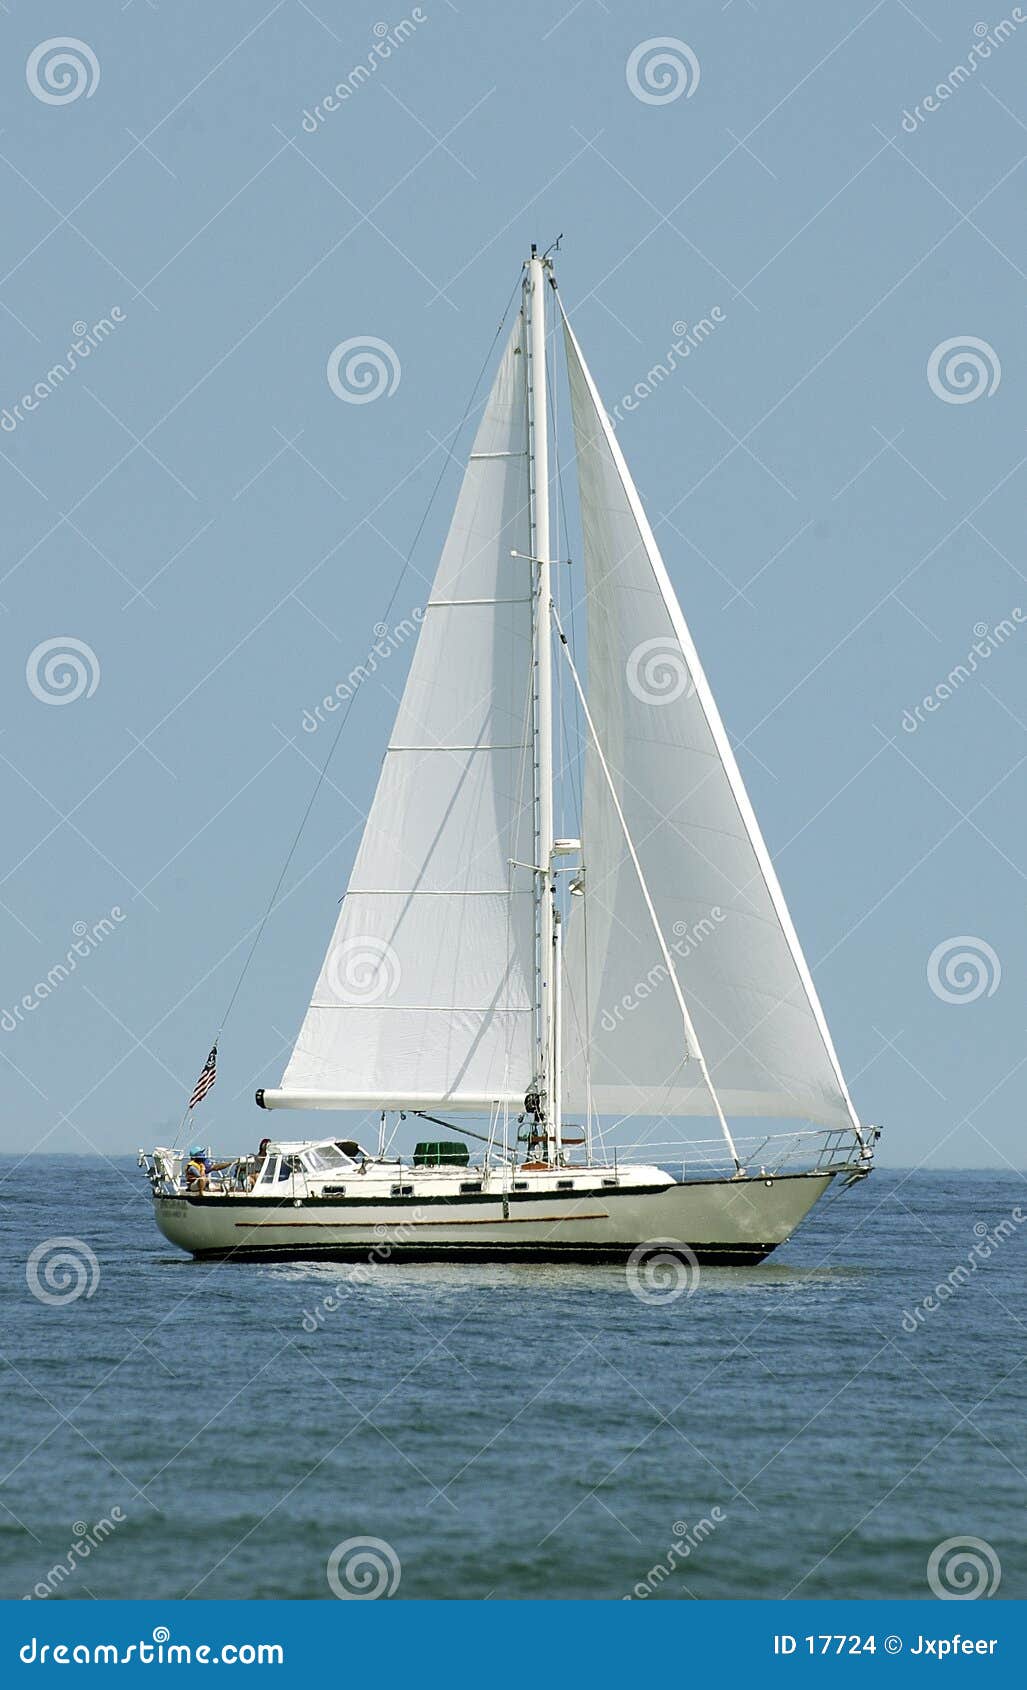 white sailboat with sails deployed, on the ocean. crop is vertical.